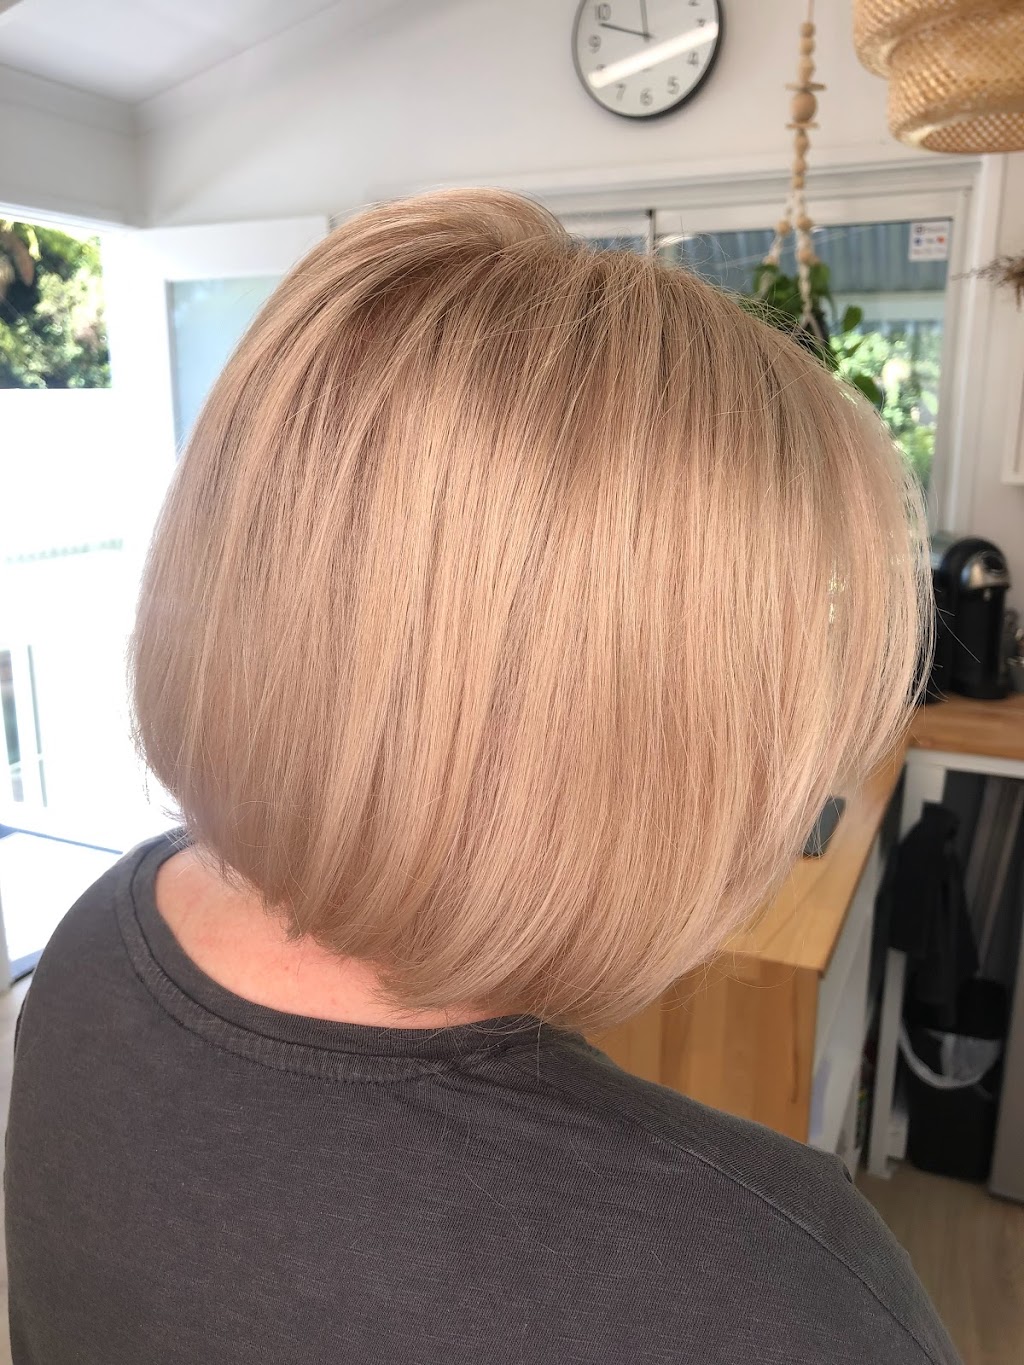 All About the Blondes | 22 Iliad Ave, Buderim QLD 4556, Australia | Phone: 0492 975 180